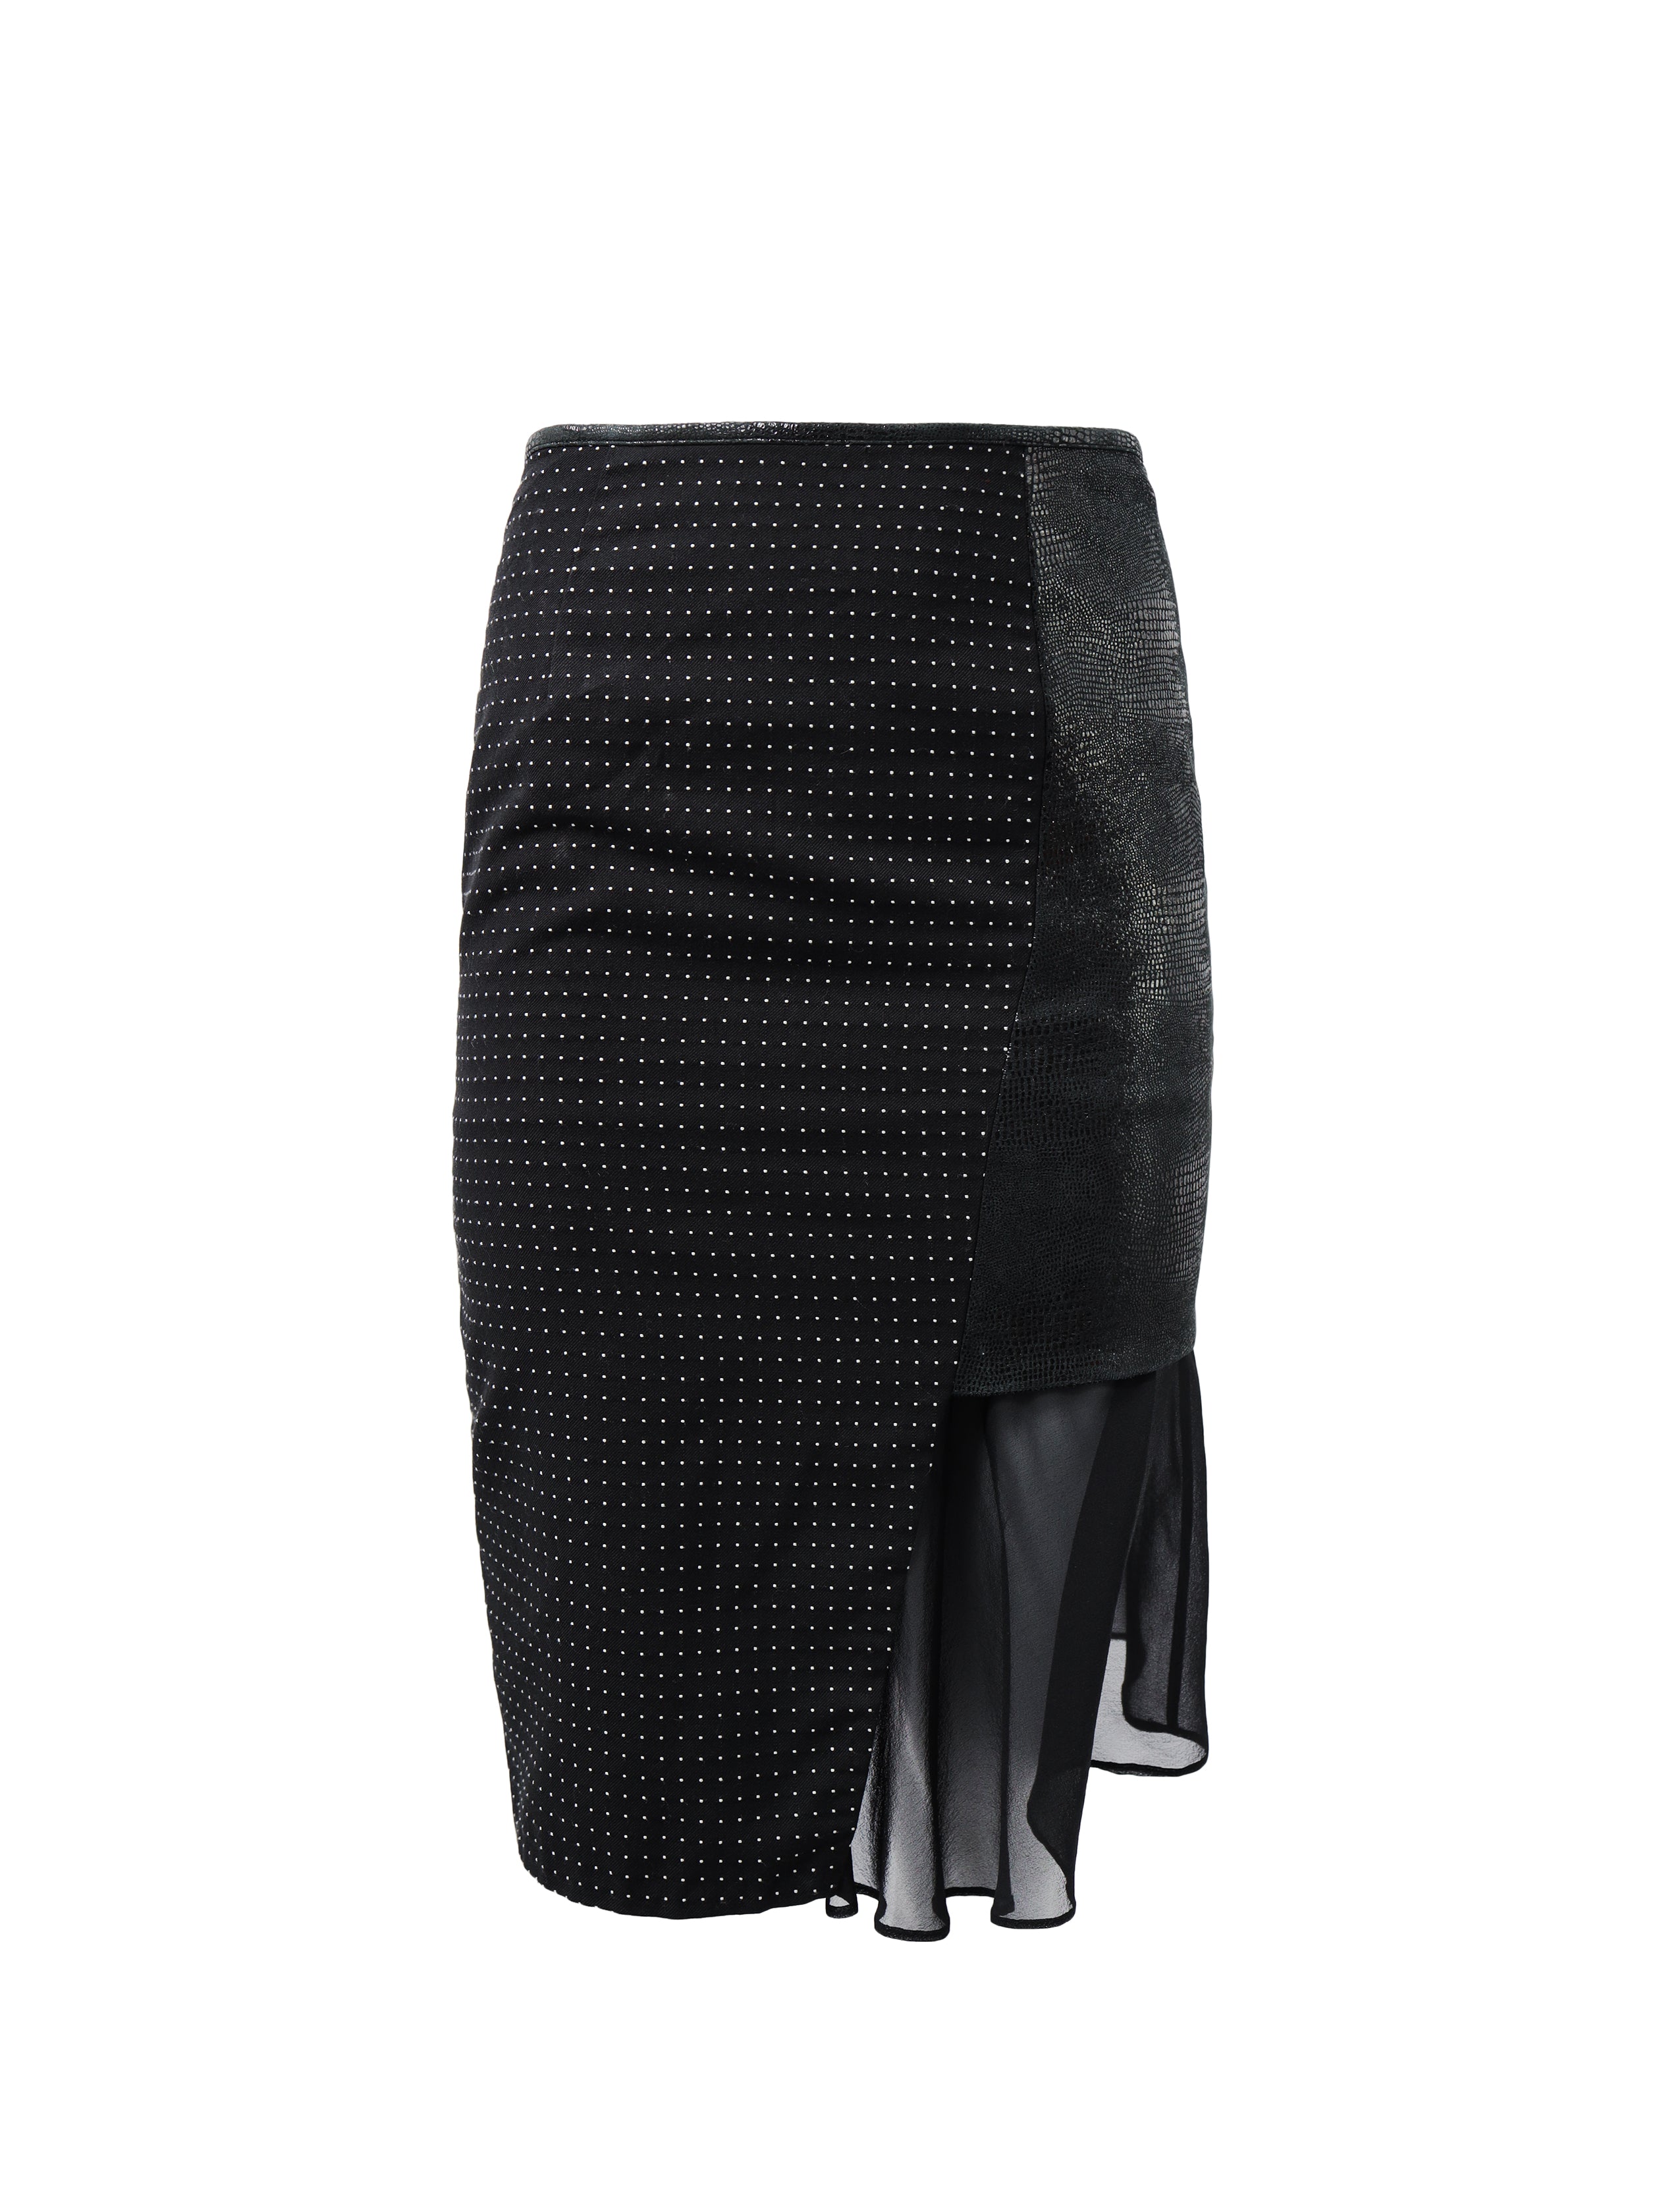 Stretch Leather Black Skirt With Polka Dot Detailing